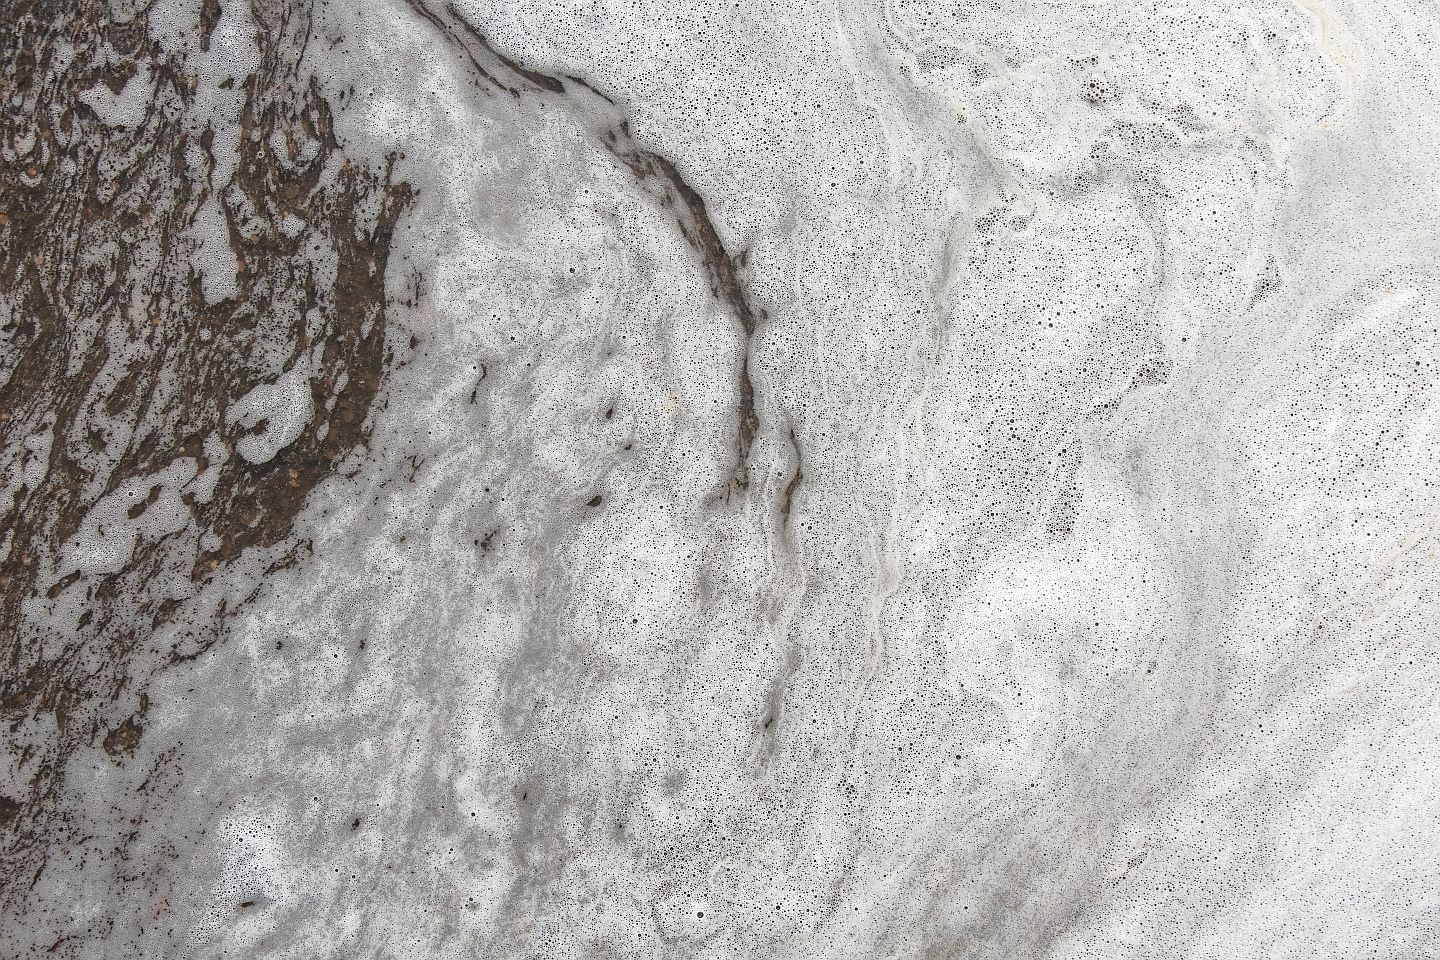 An image of firefighting foam, which contains PFAS chemicals